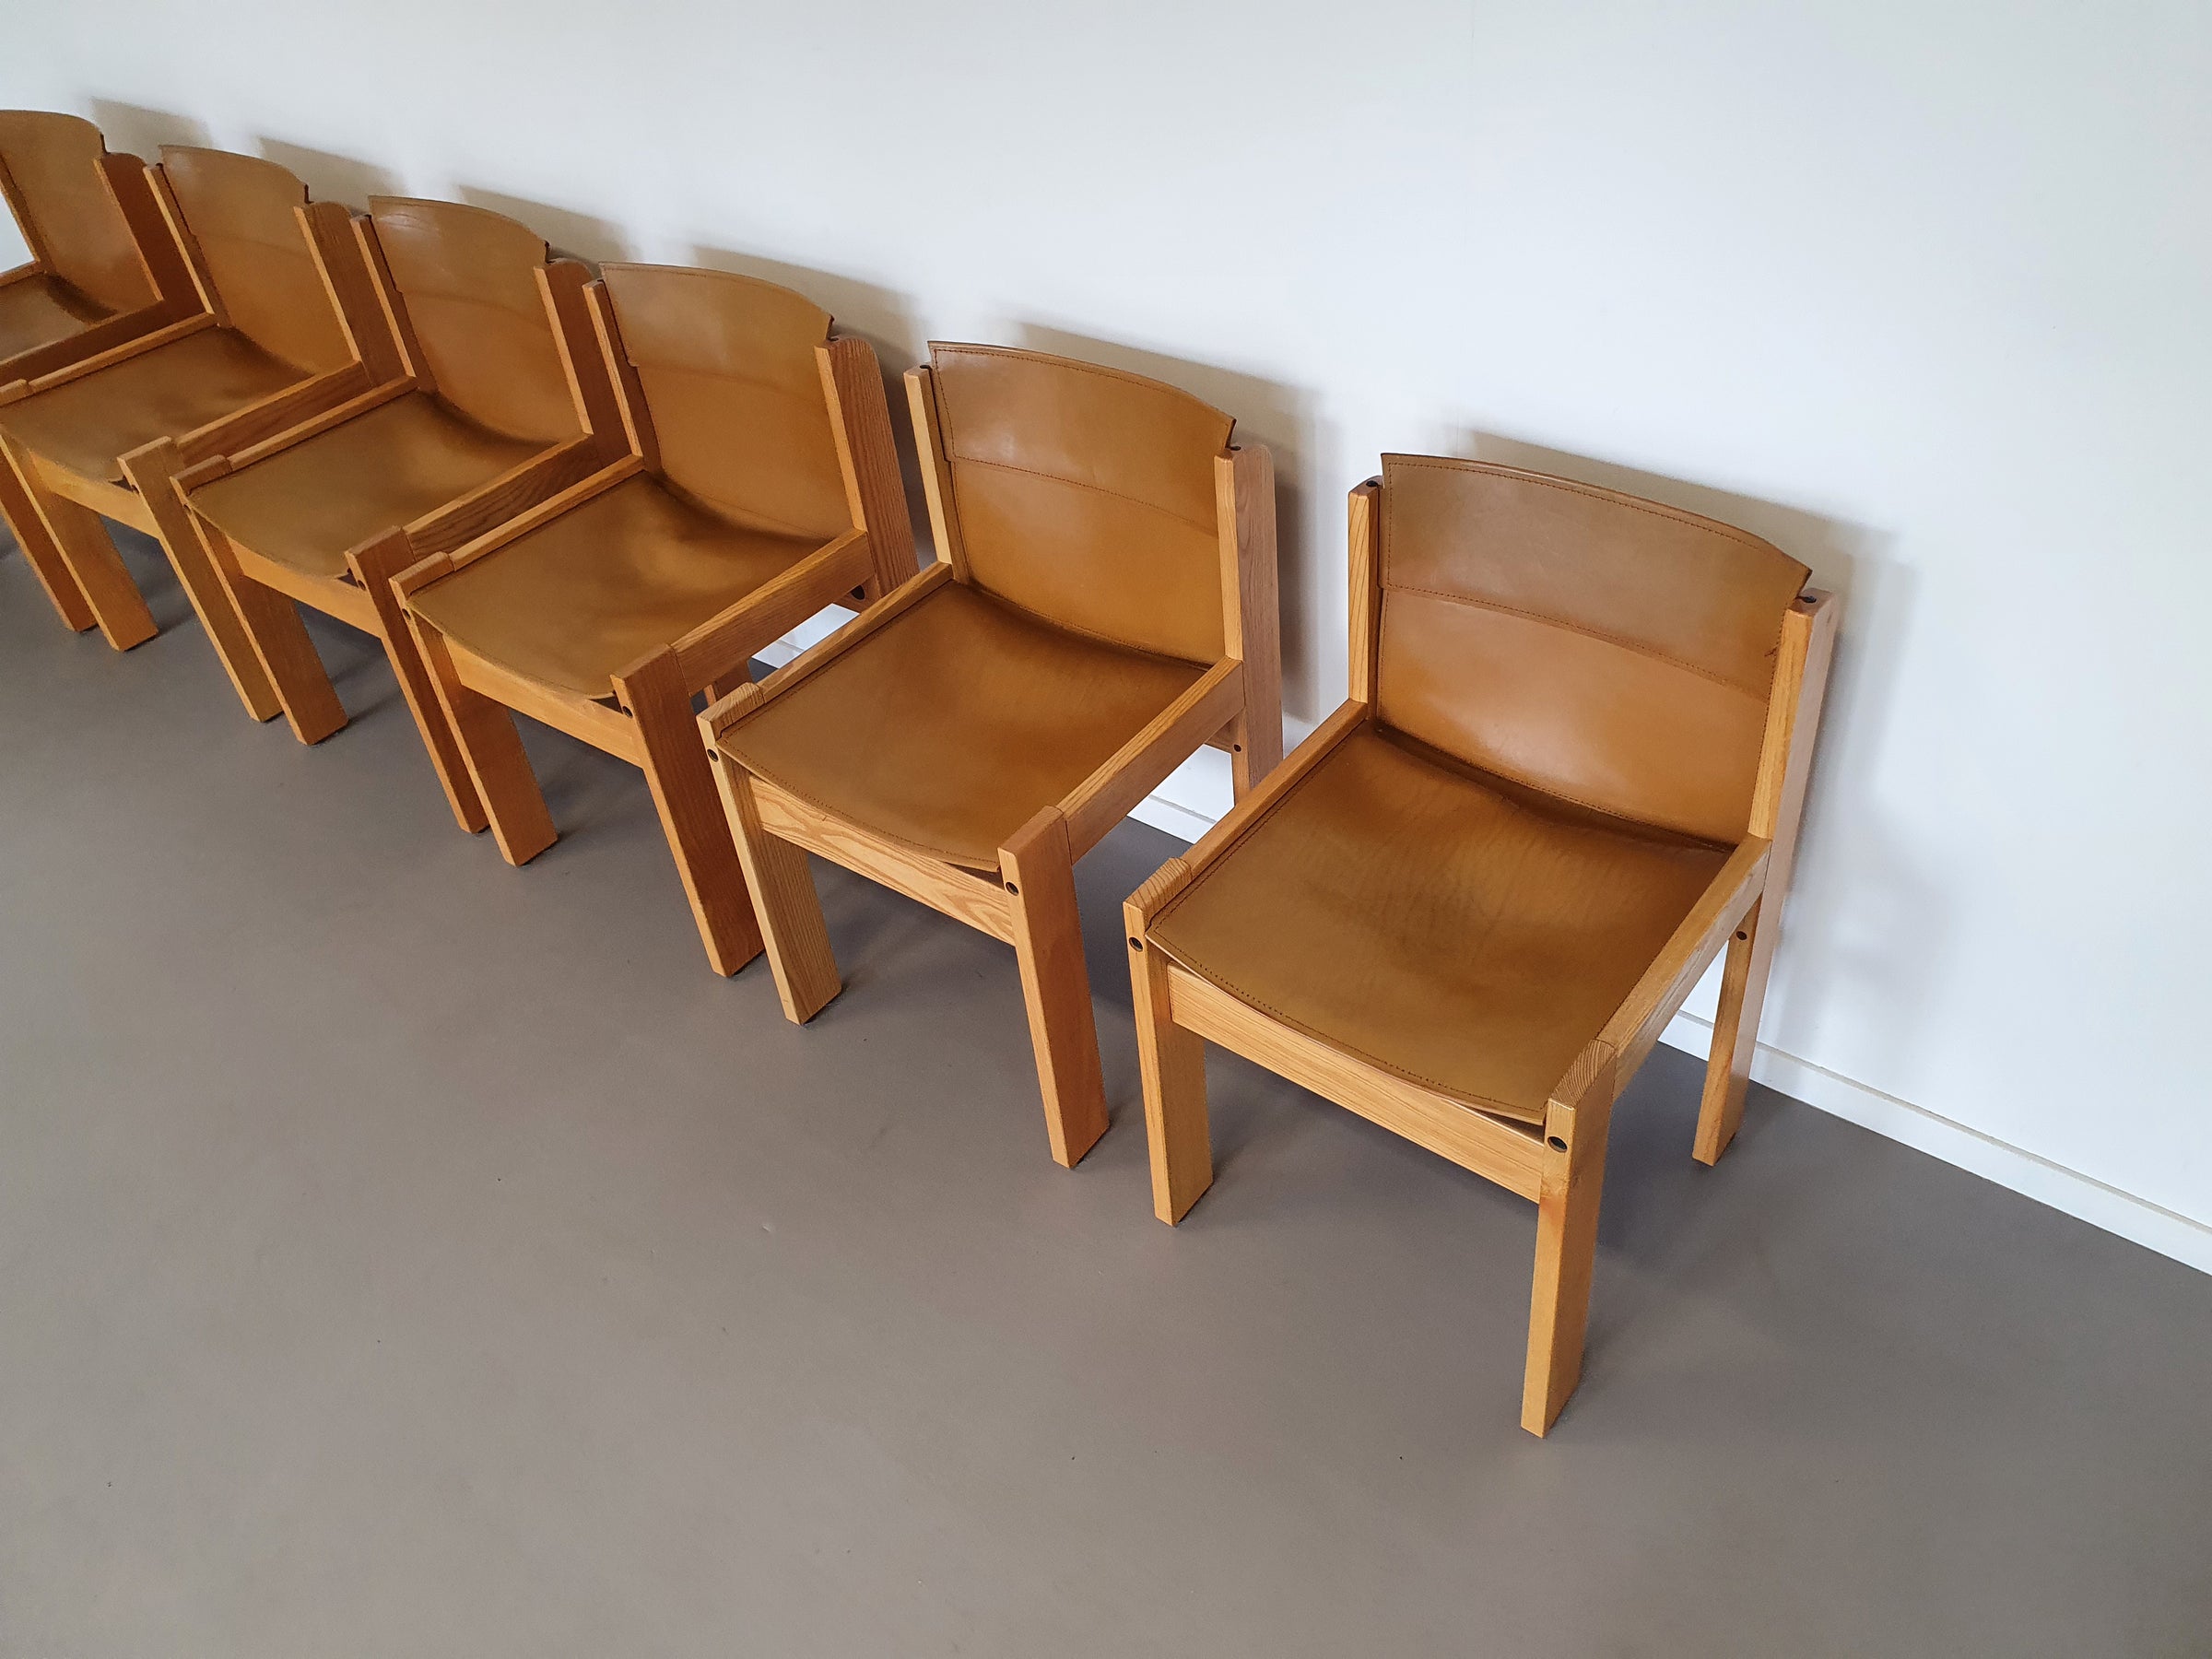 6 x Ibisco dining chair 1970s